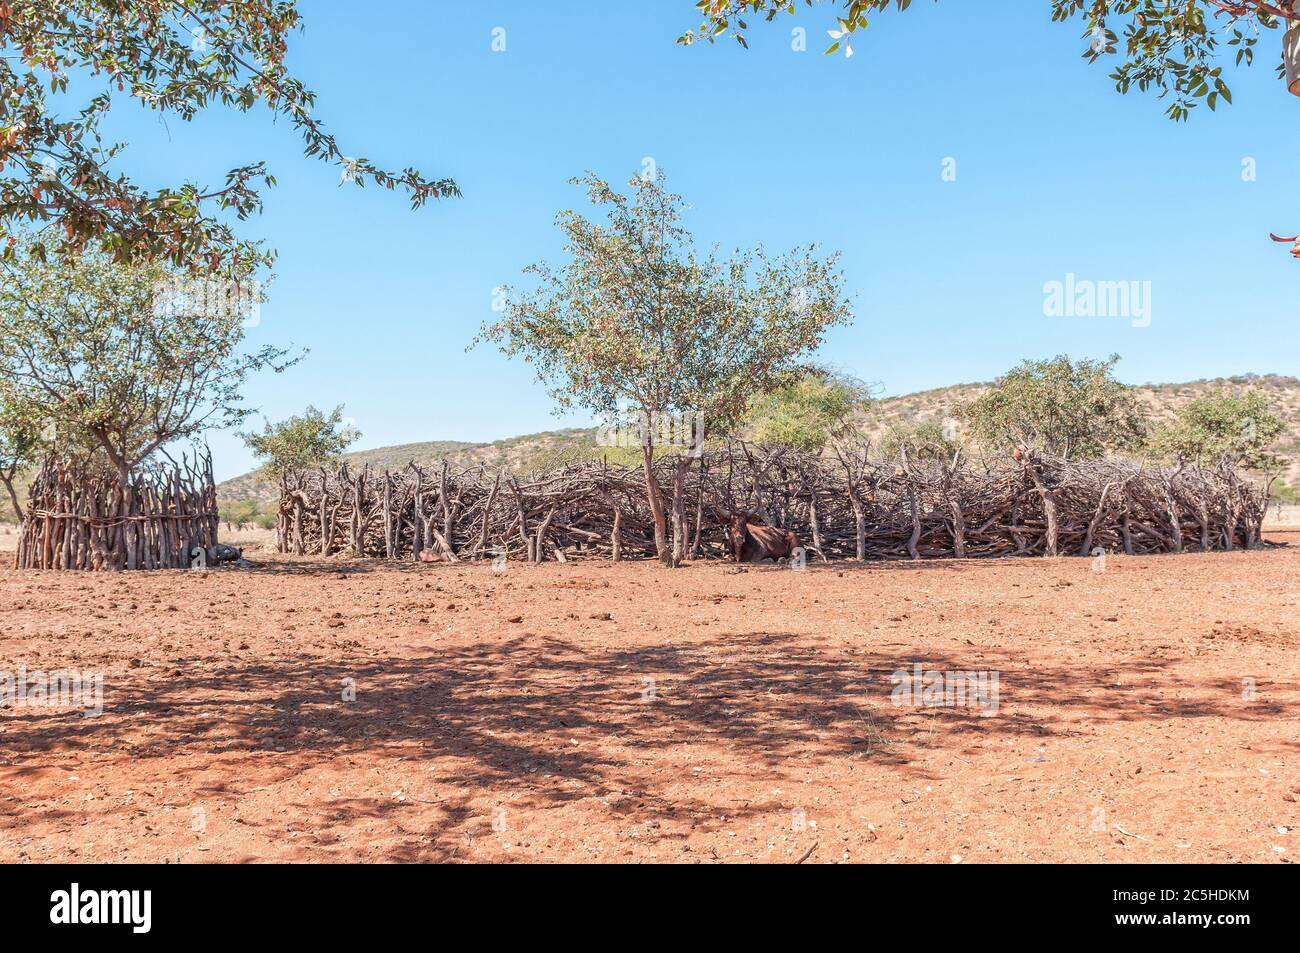 A nguni cow in front of a kraal in a Himba village near Epupa Stock Photo